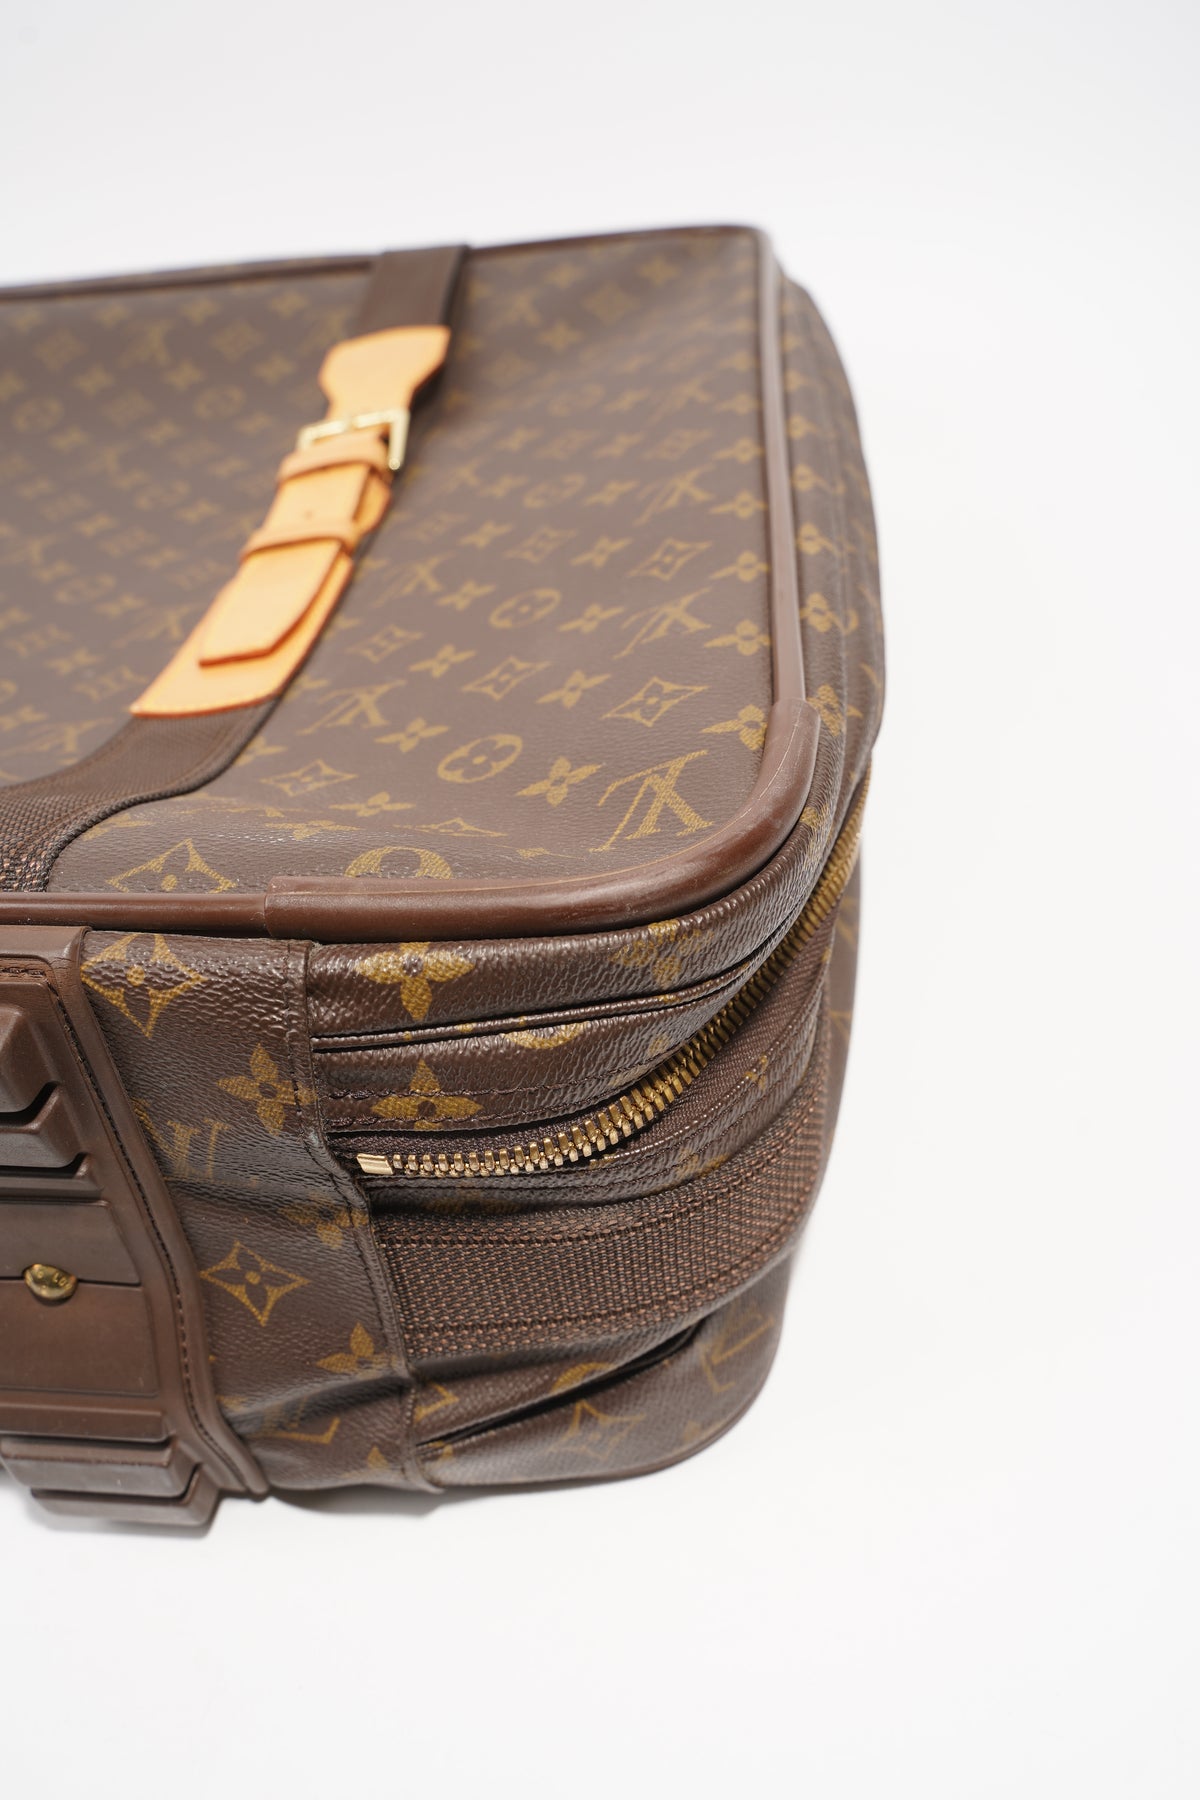 A CLASSIC MONOGRAM CANVAS SATELLITE 60 SUITCASE WITH GOLDEN BRASS